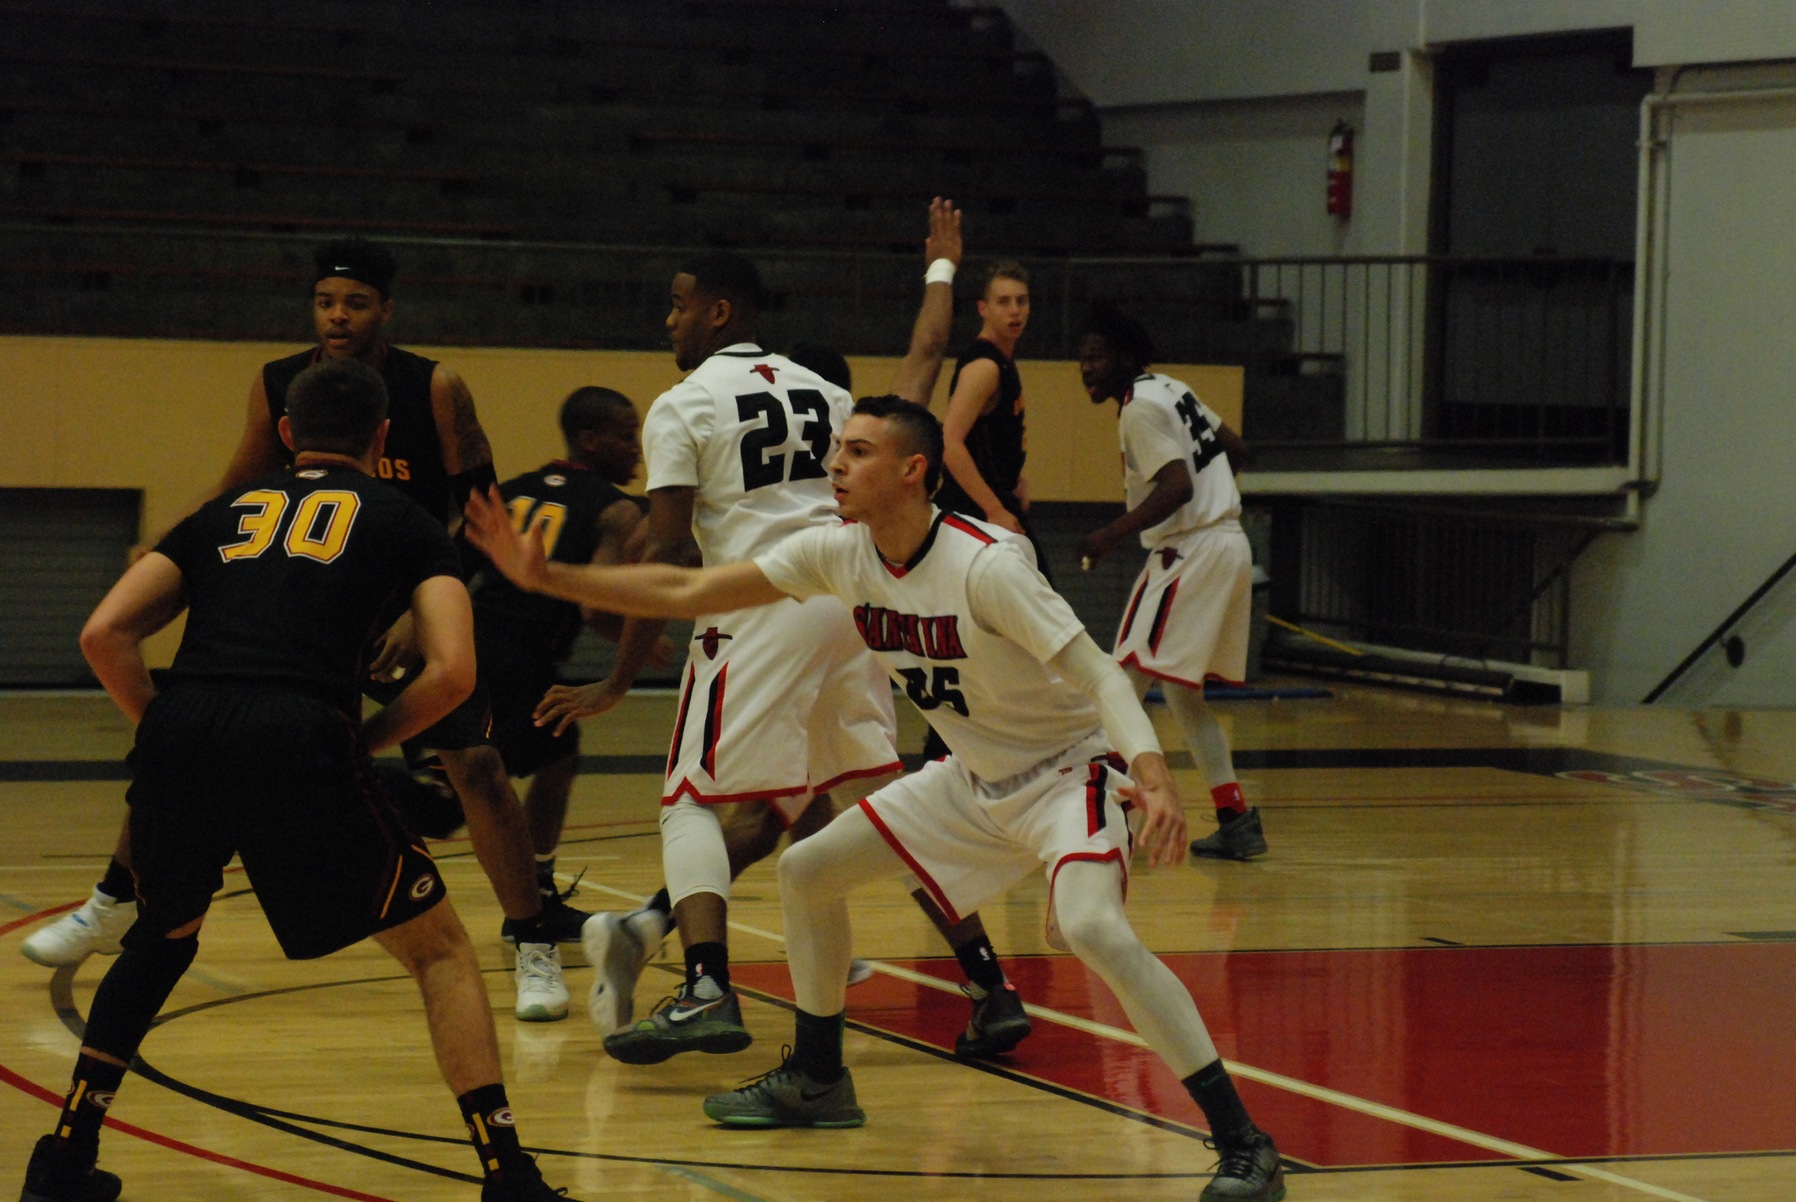 The Dons lost an Orange Empire Conference game to visiting Saddleback College 95-66.